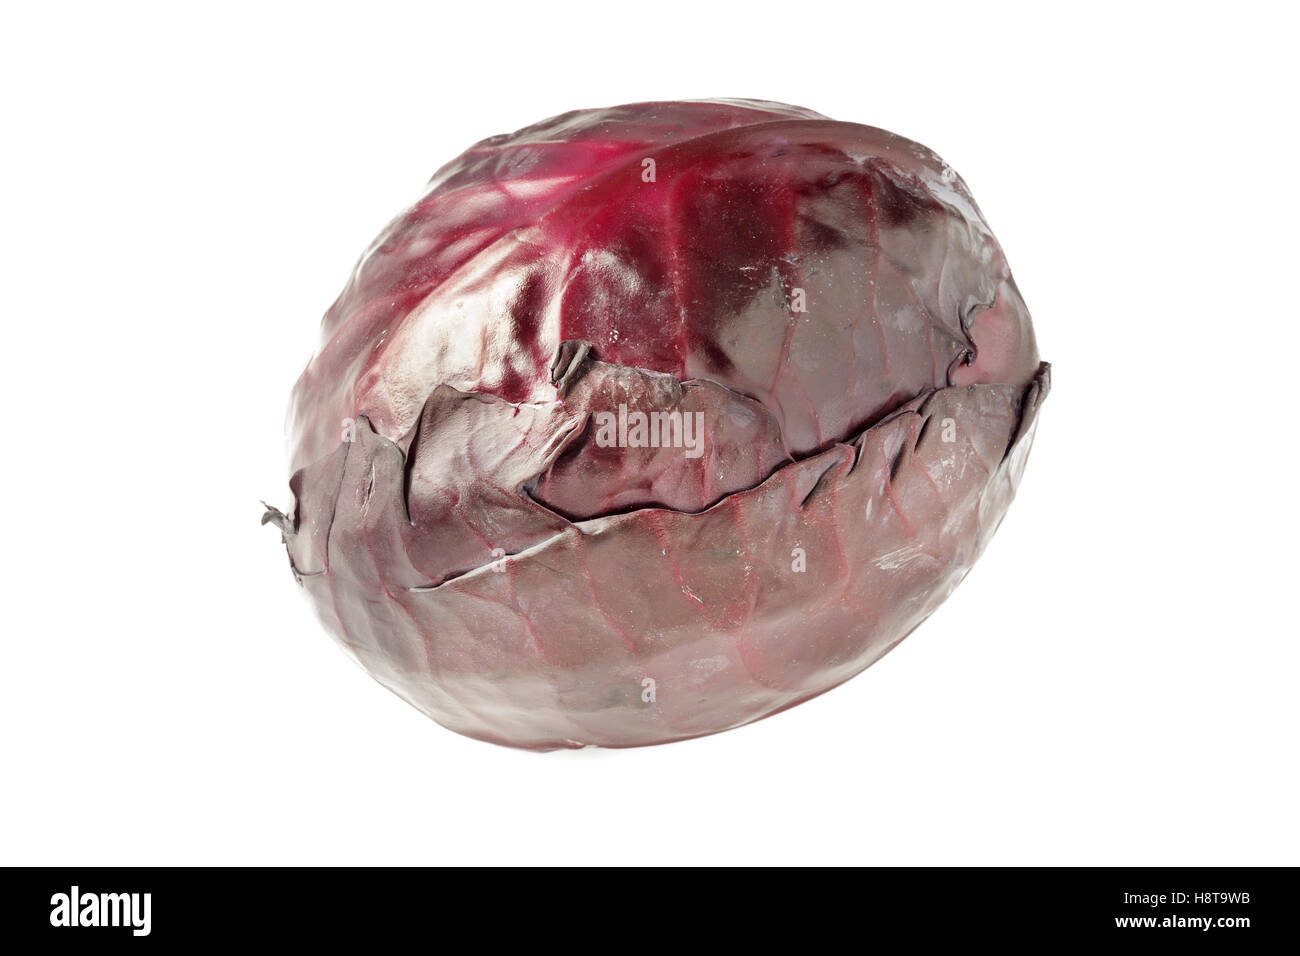 Red Cabbage whole Stock Photo